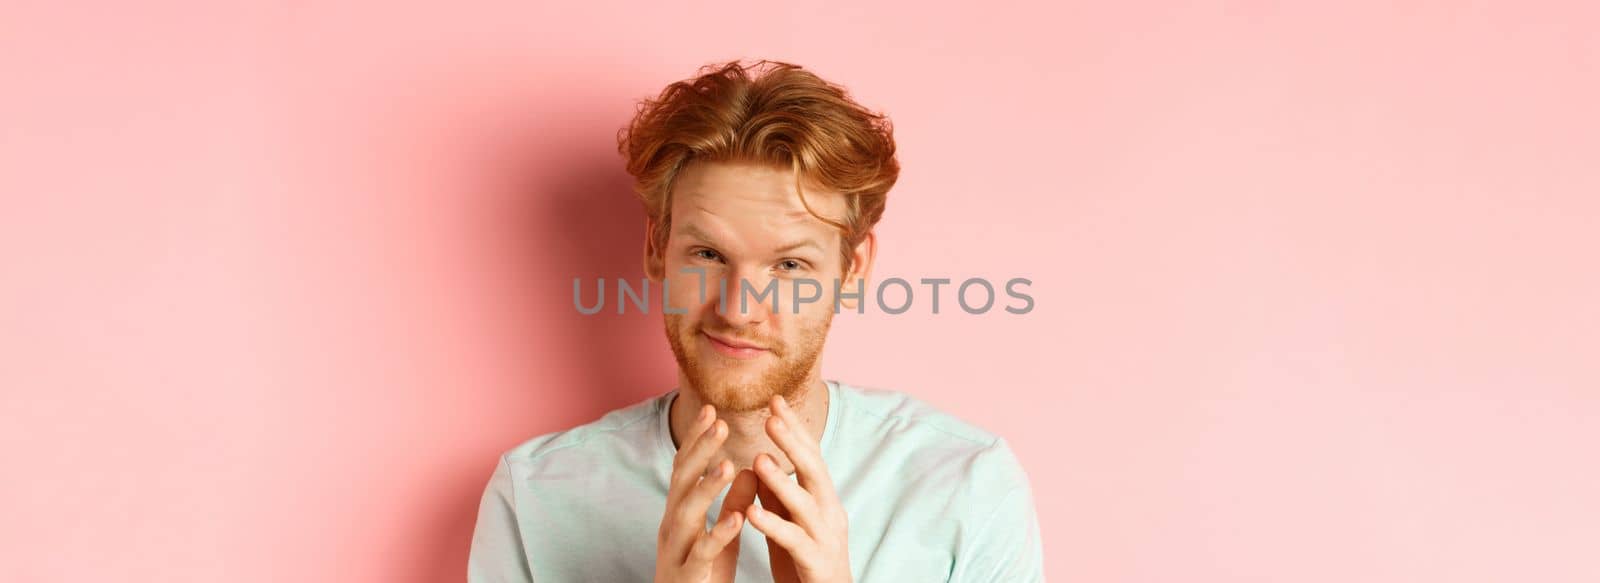 Close up of funny bearded man with red hair pitching a perfect plan, smiling and steeple fingers, scheming something, standing devious against pink background.